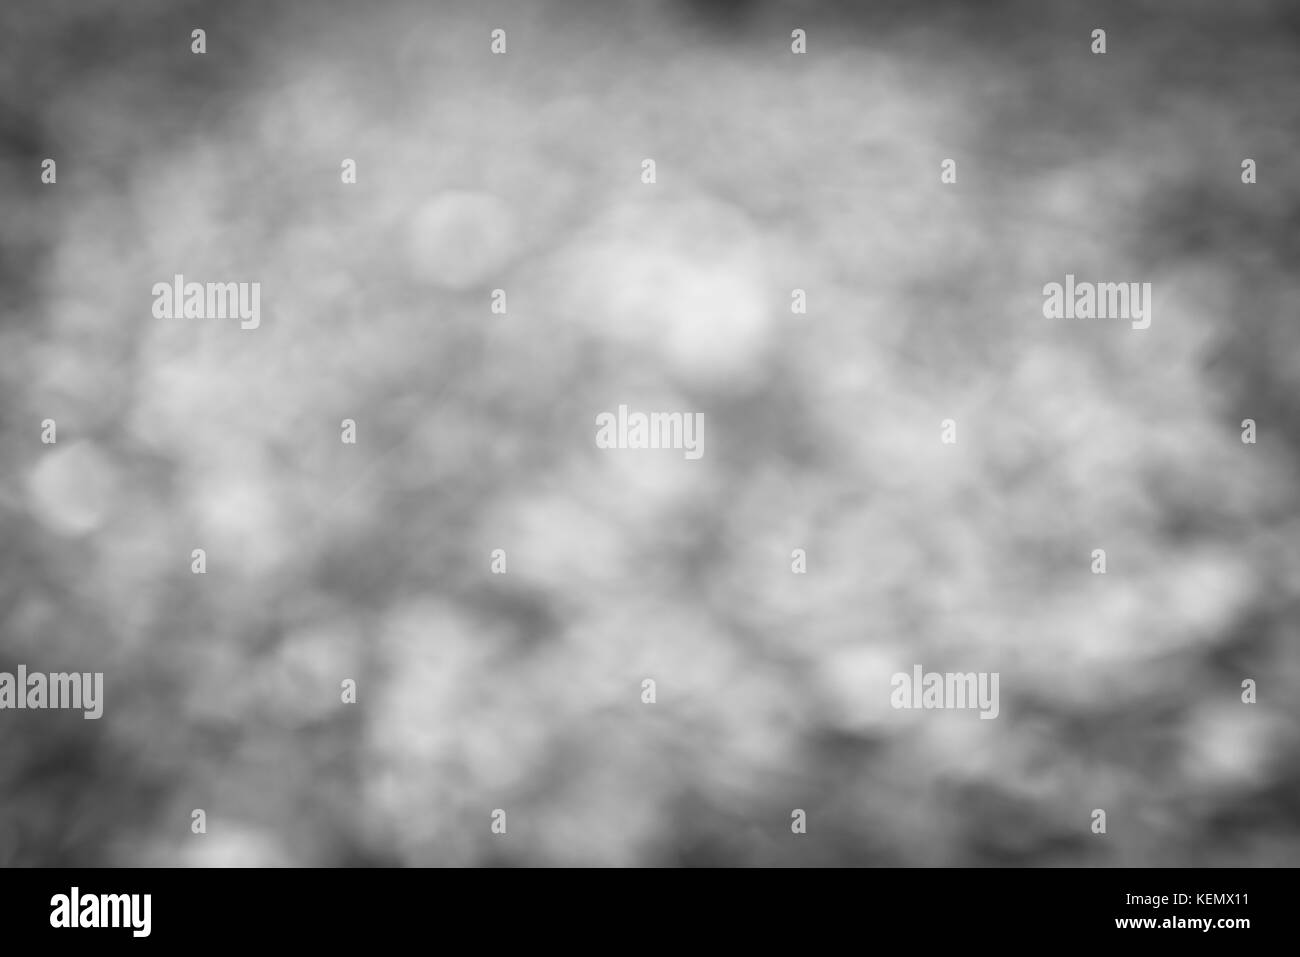 Abstract blurred autumn background, black and white tones, vignette effect Stock Photo